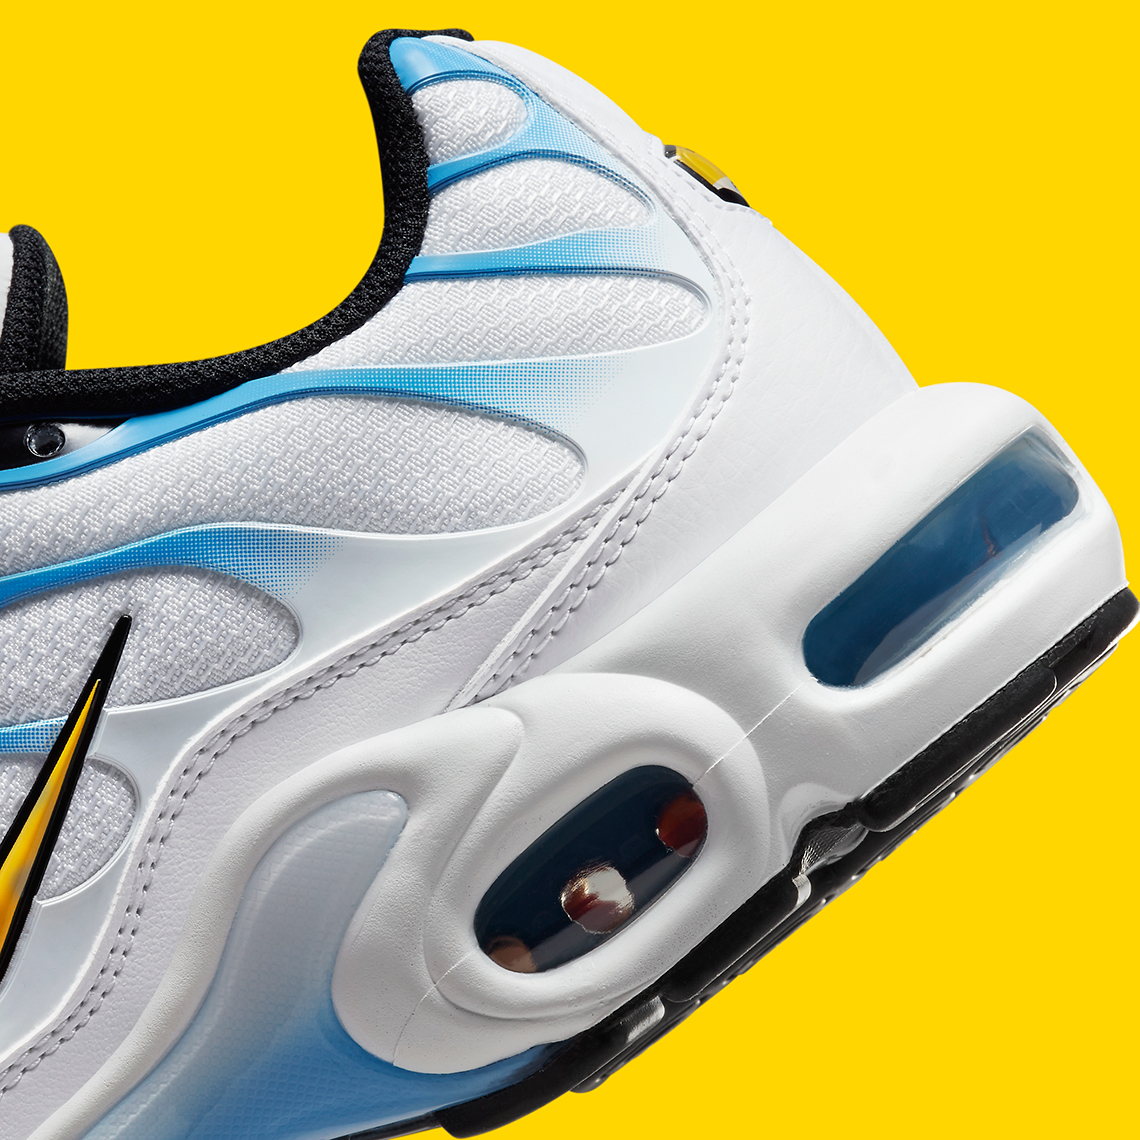 nike air max 2014 price in india today 2019 White University Blue Yellow Dm0032 101 2